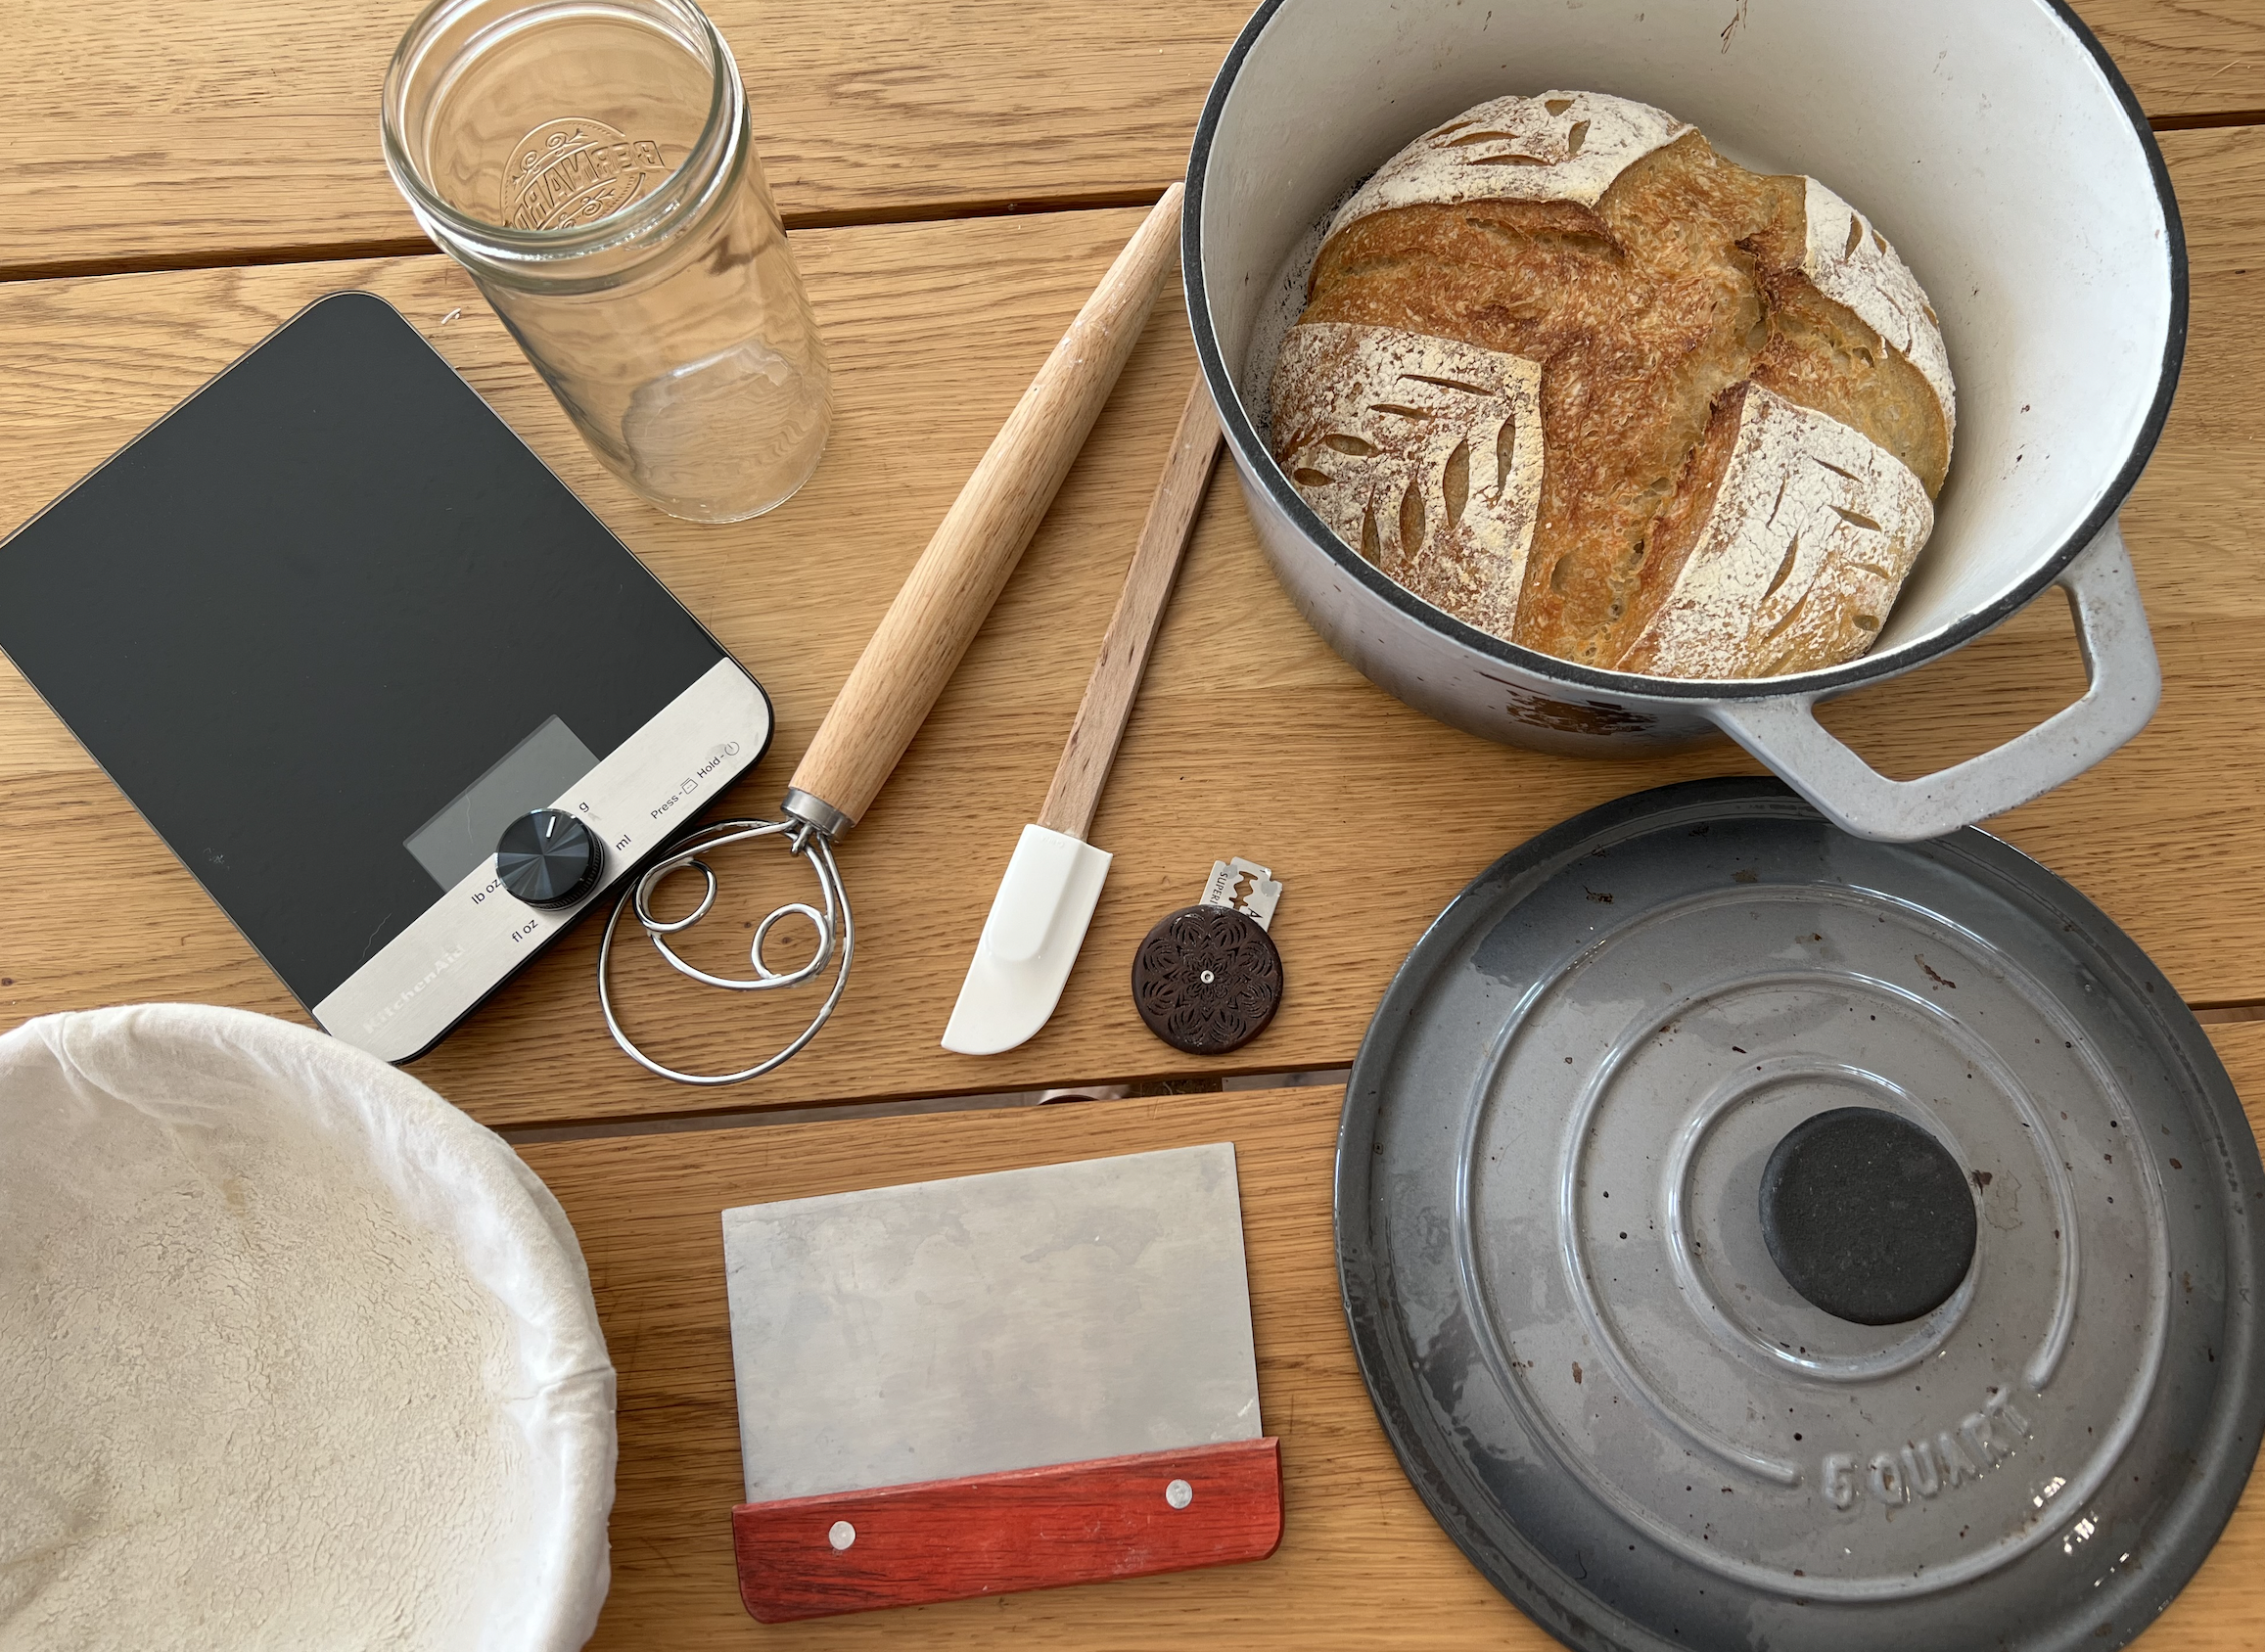 https://sourdoughbread.ca/wp-content/uploads/2023/06/sourdough-bread-kits-online-in-canada-are-they-worth-it-what-tools-supplies-equipment-come-with-them-and-are-they-good-value.png